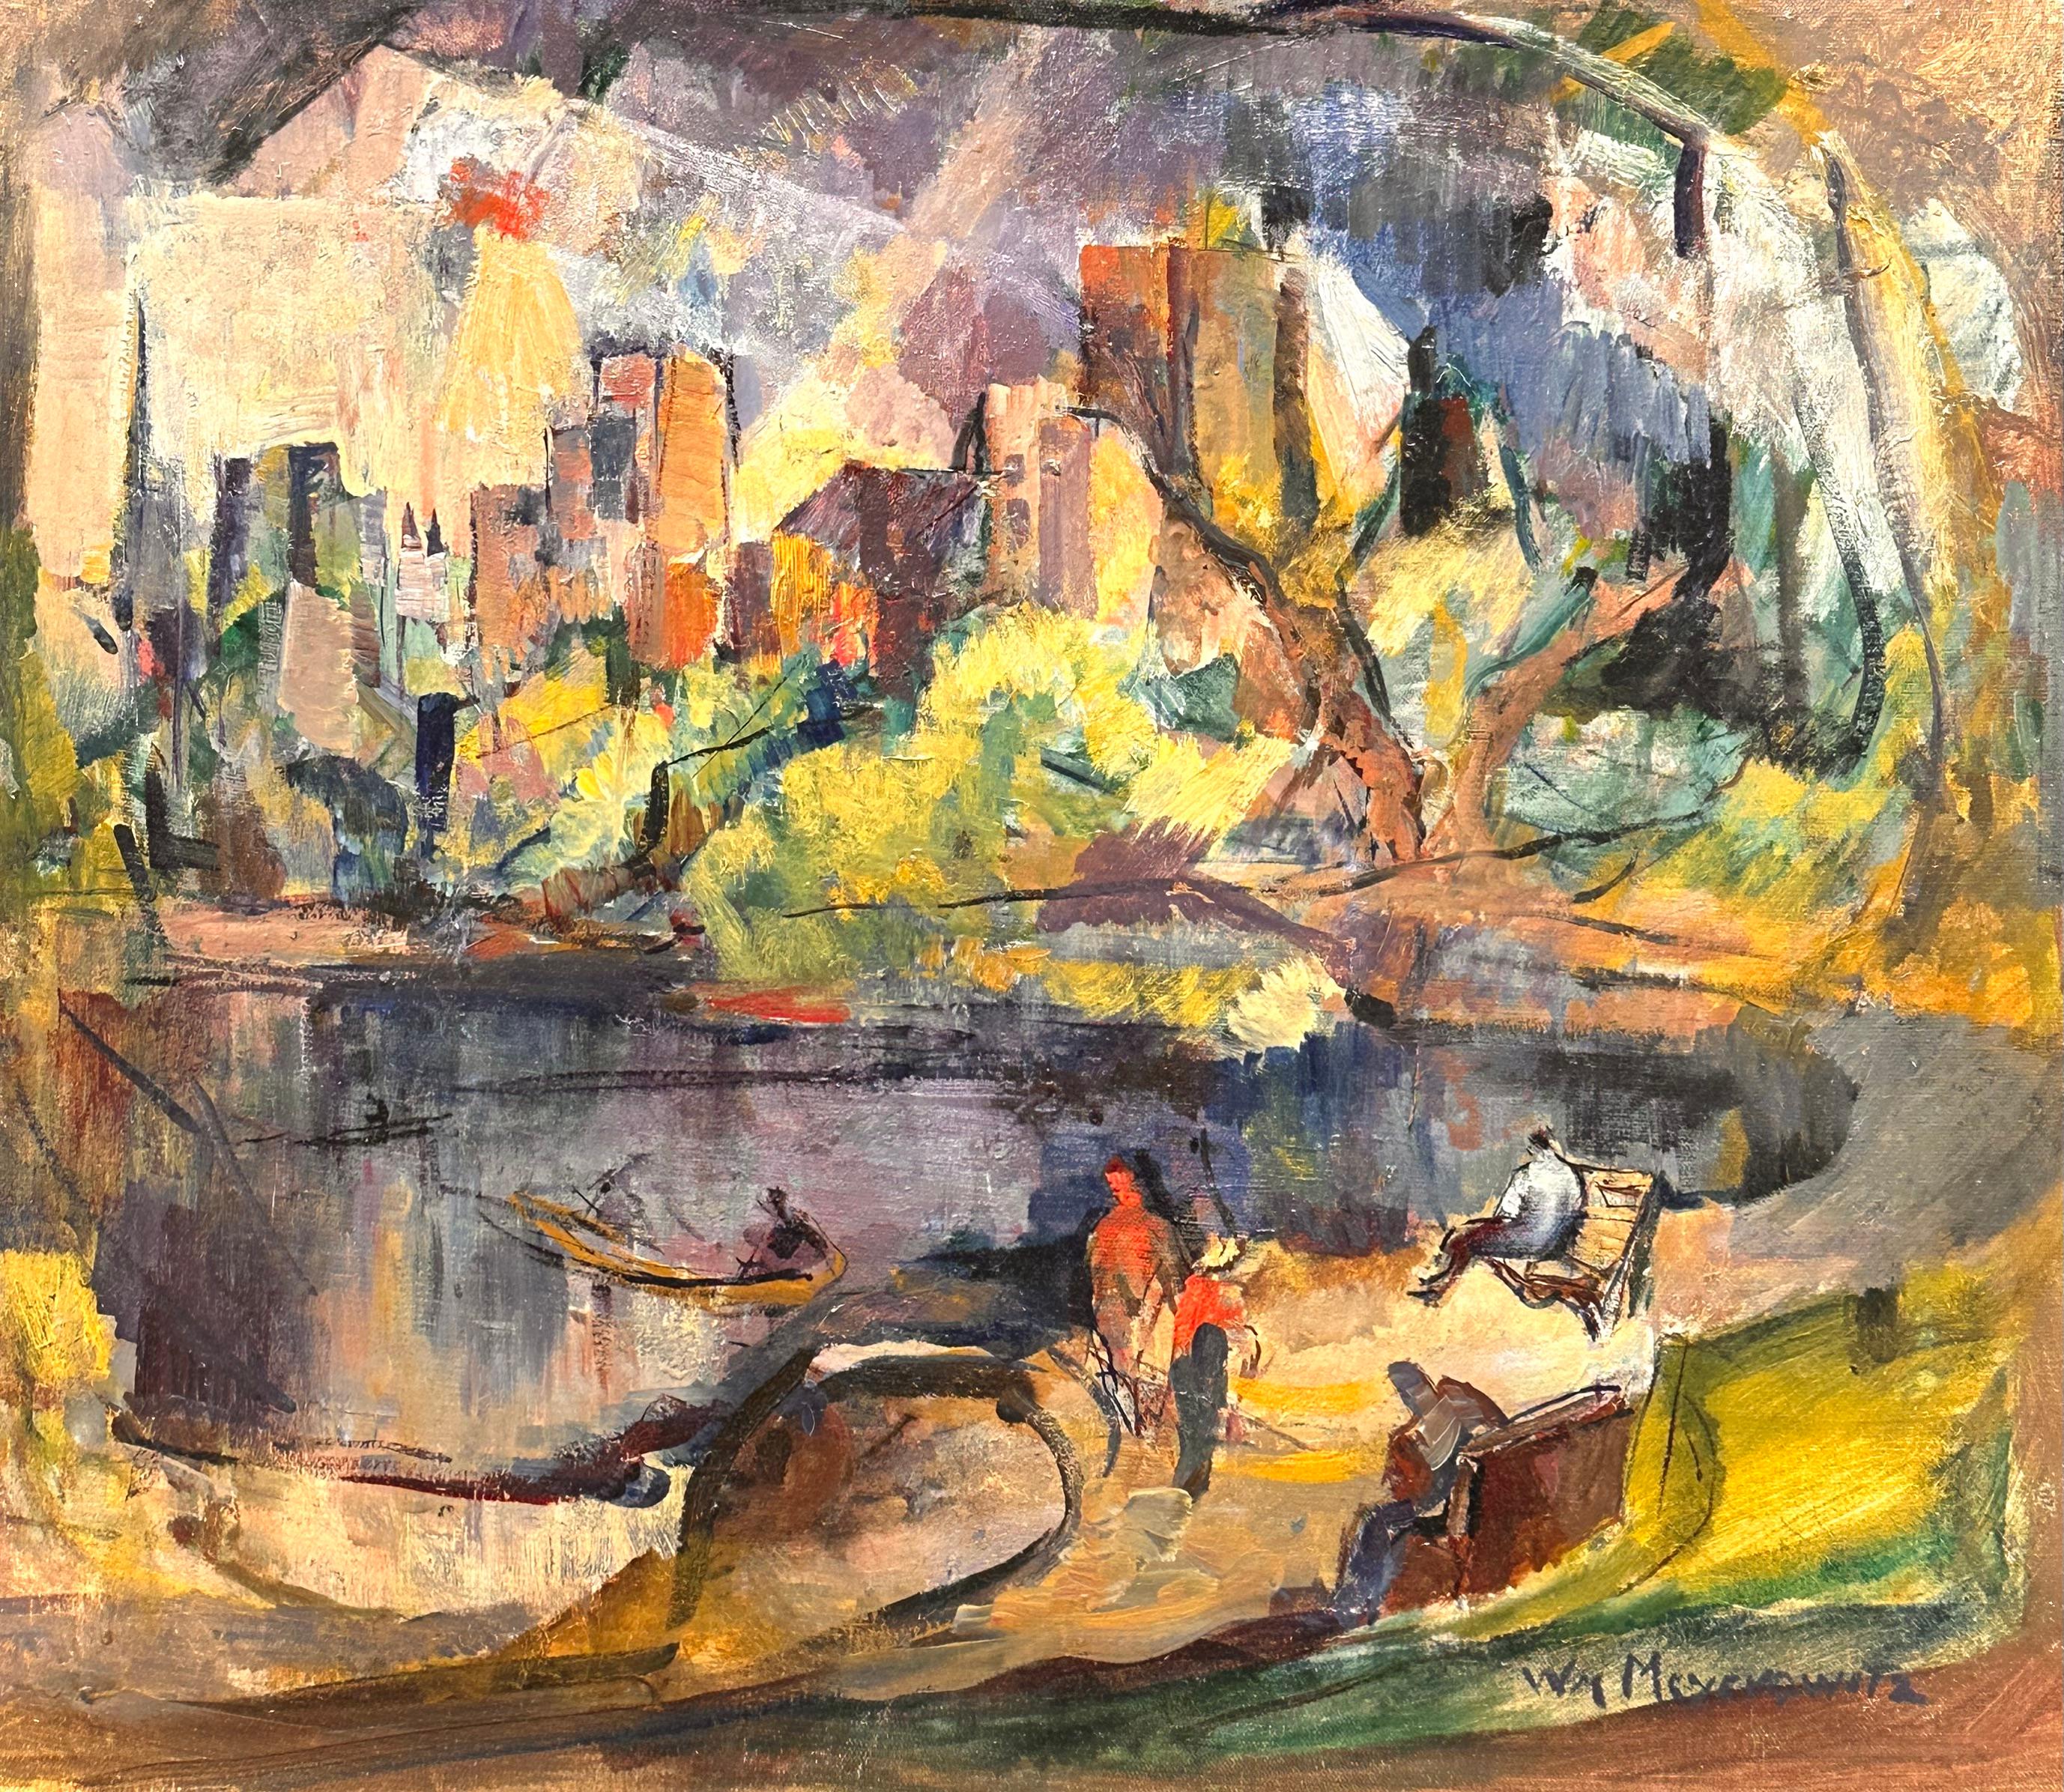 William Meyerowitz Abstract Painting - "The Lake in Central Park, 1947" - New York City Landscape, Cityscape